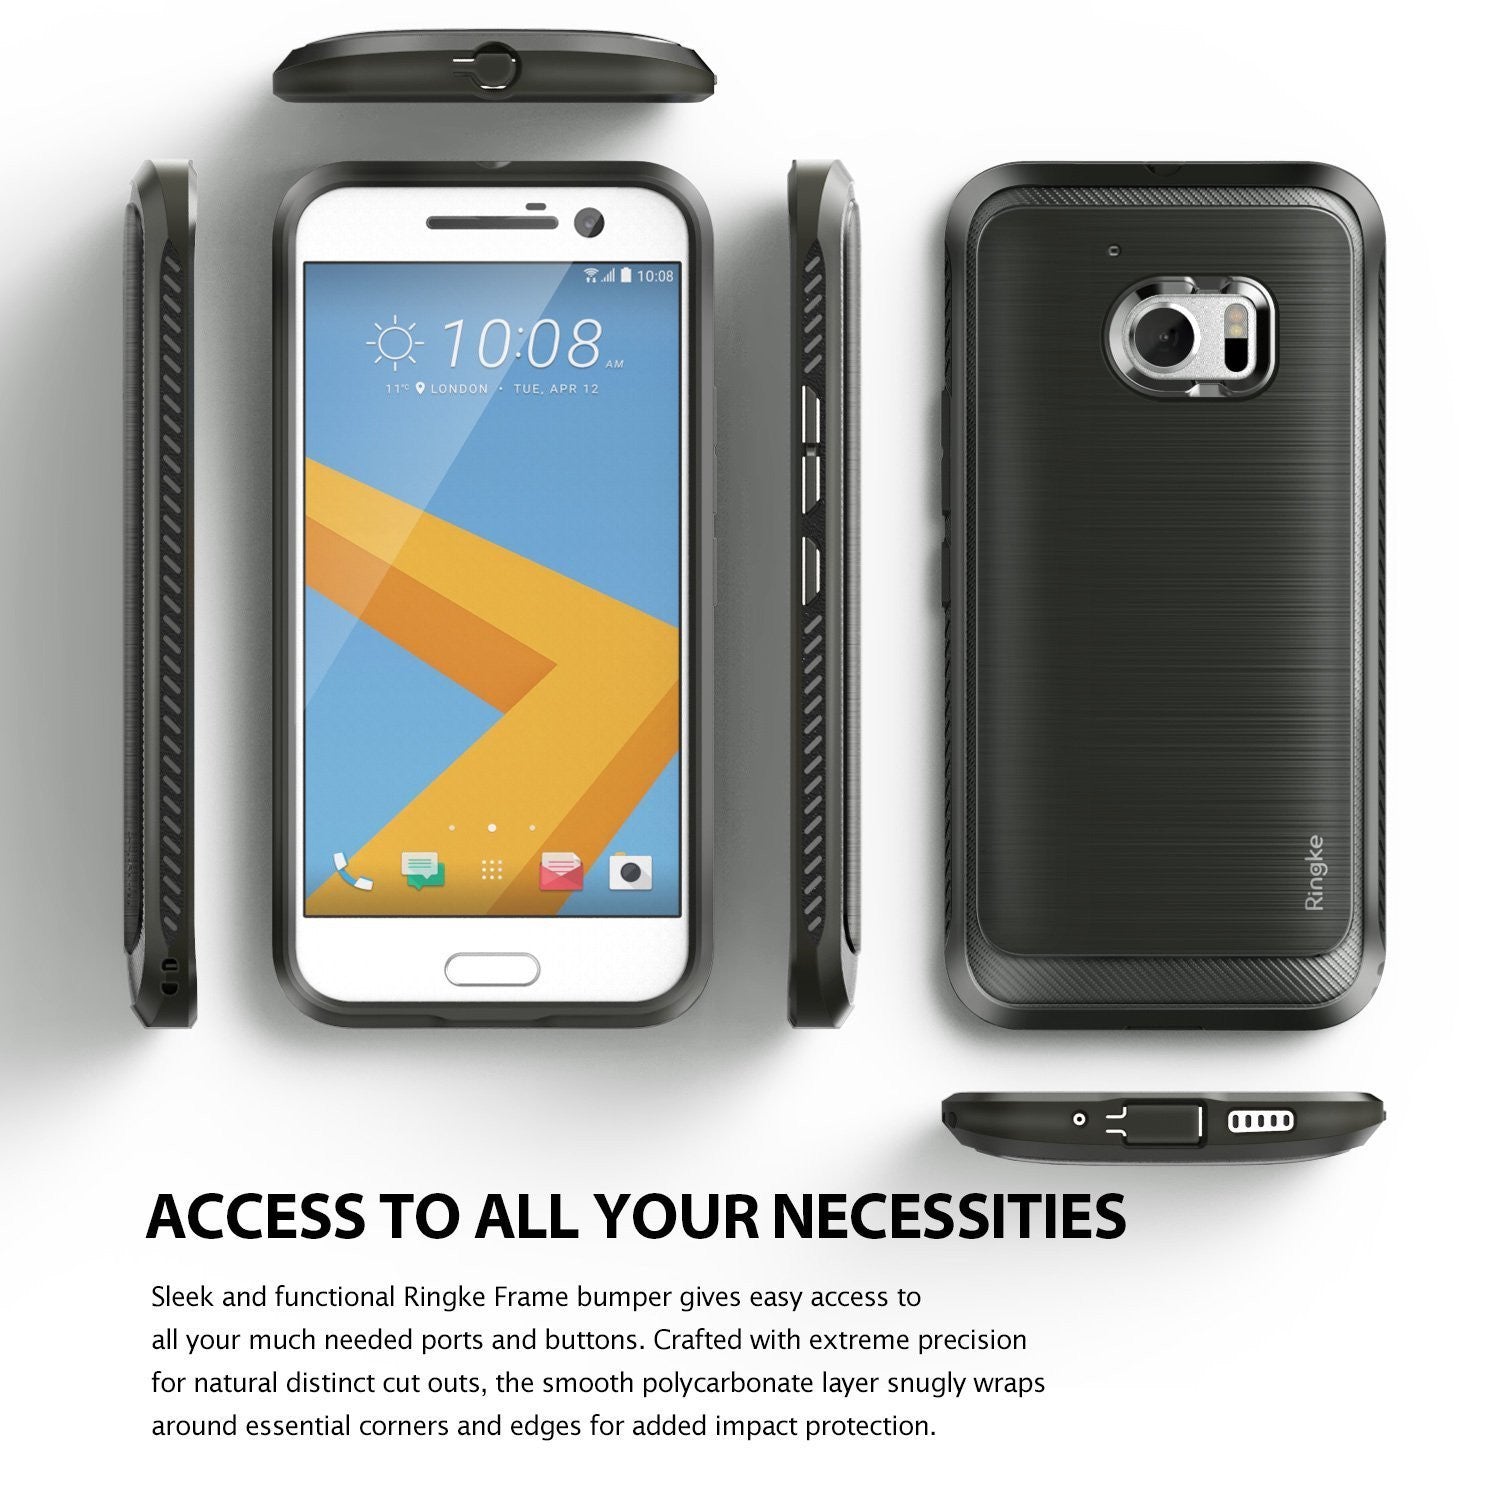 access to all your necessities